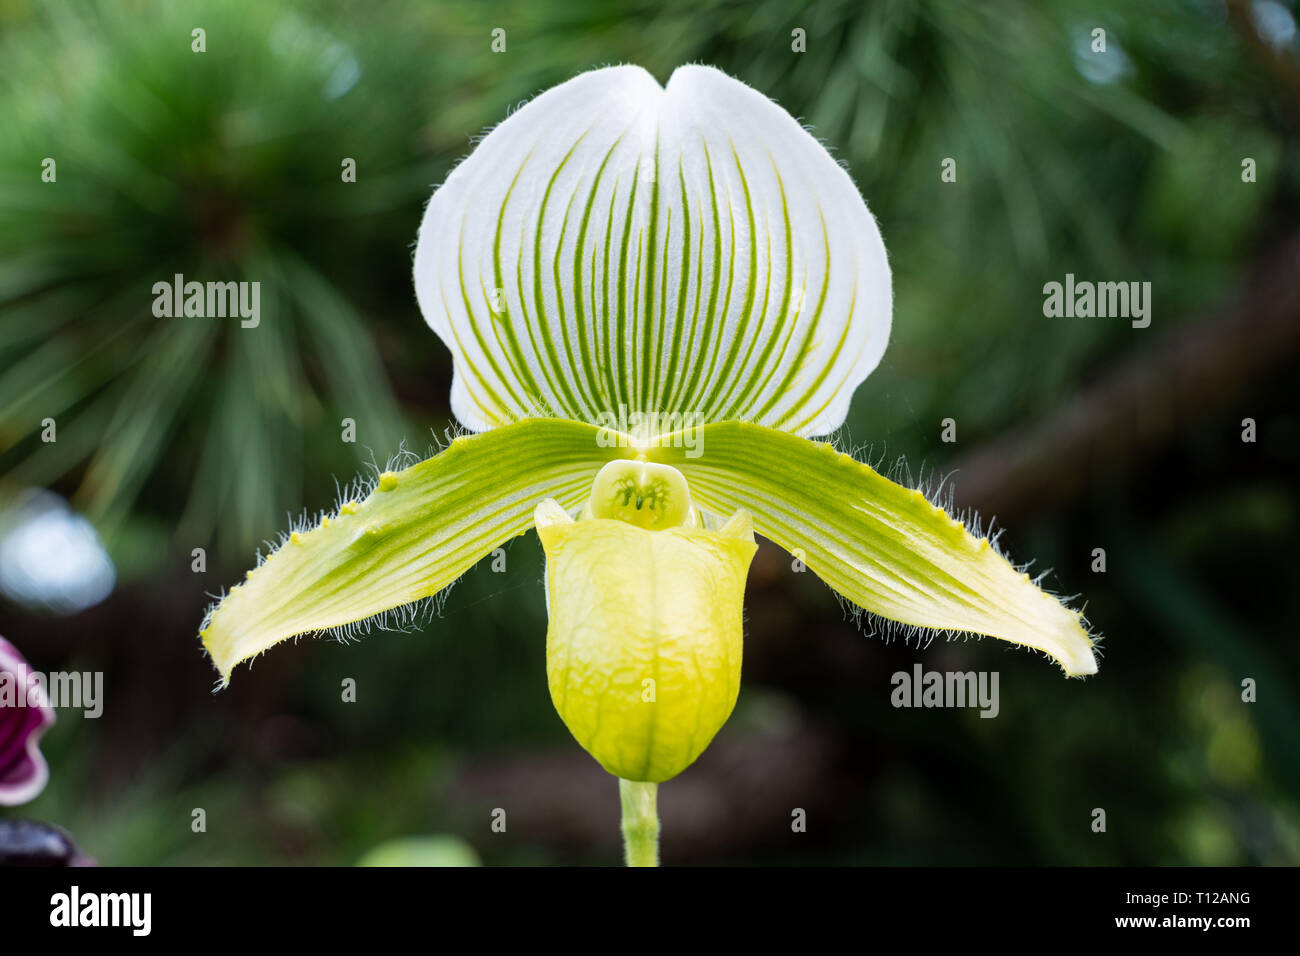 Lady's slipper, lady slipper or slipper orchid Paphiopedilum. Close-up photo of beautiful flower in nature Stock Photo